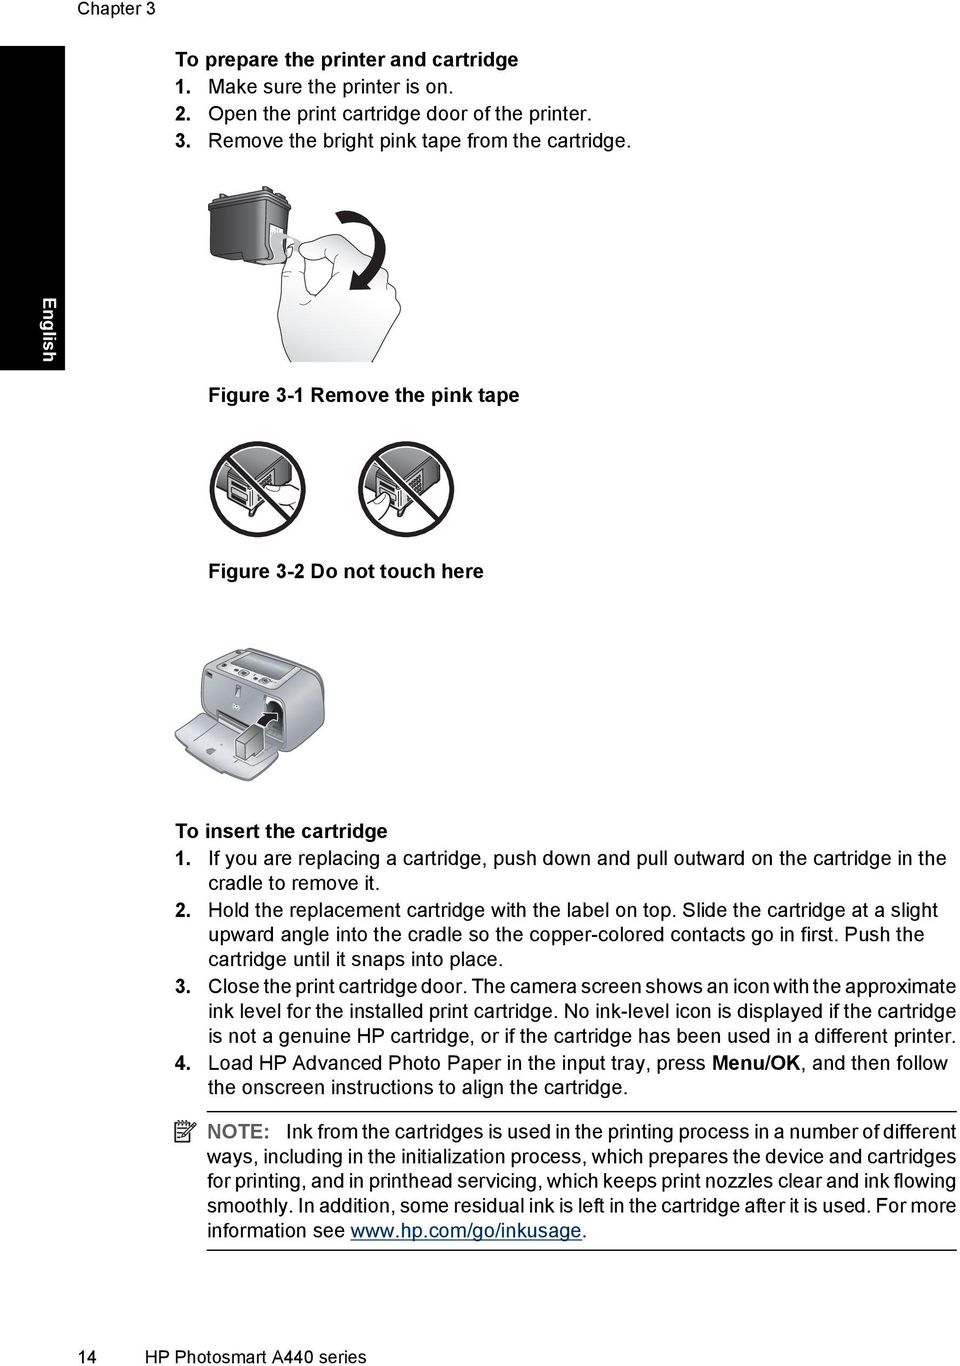 If you are replacing a cartridge, push down and pull outward on the cartridge in the cradle to remove it. 2. Hold the replacement cartridge with the label on top.